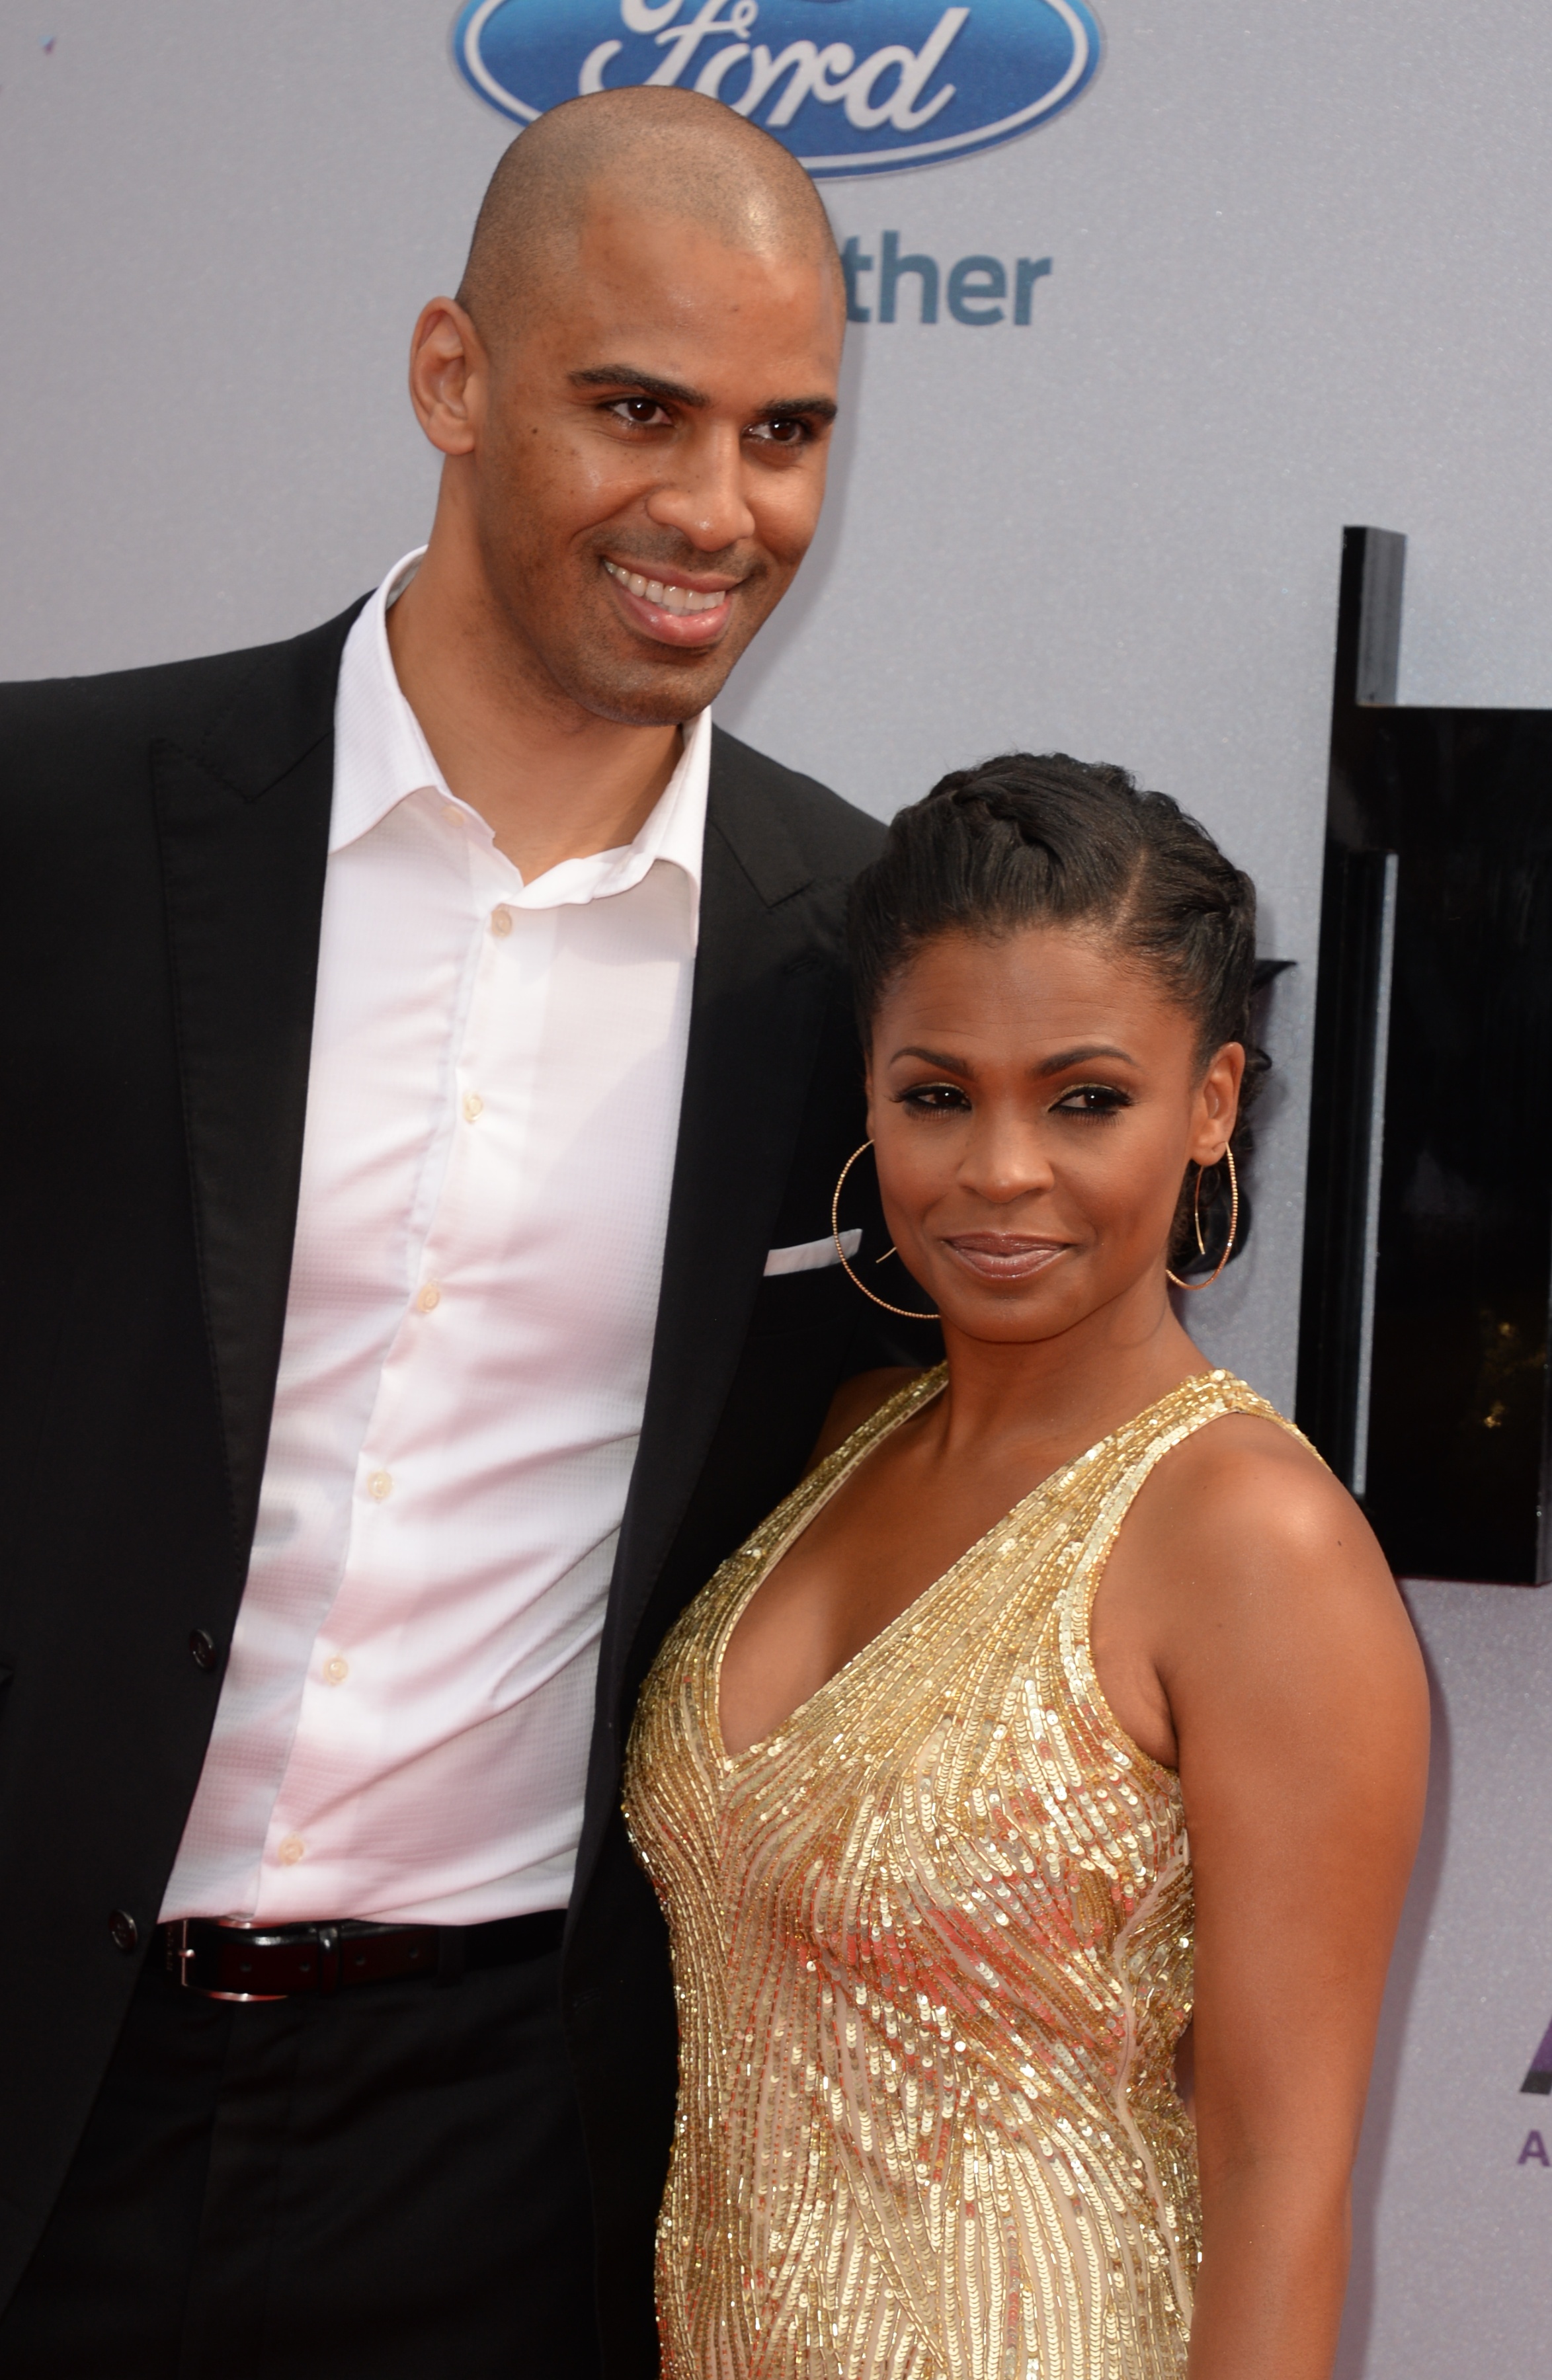 Nia Long and Ime Udoka at the 2013 BET Awards in Los Angeles on June 30, 2013. | Source: Getty Images